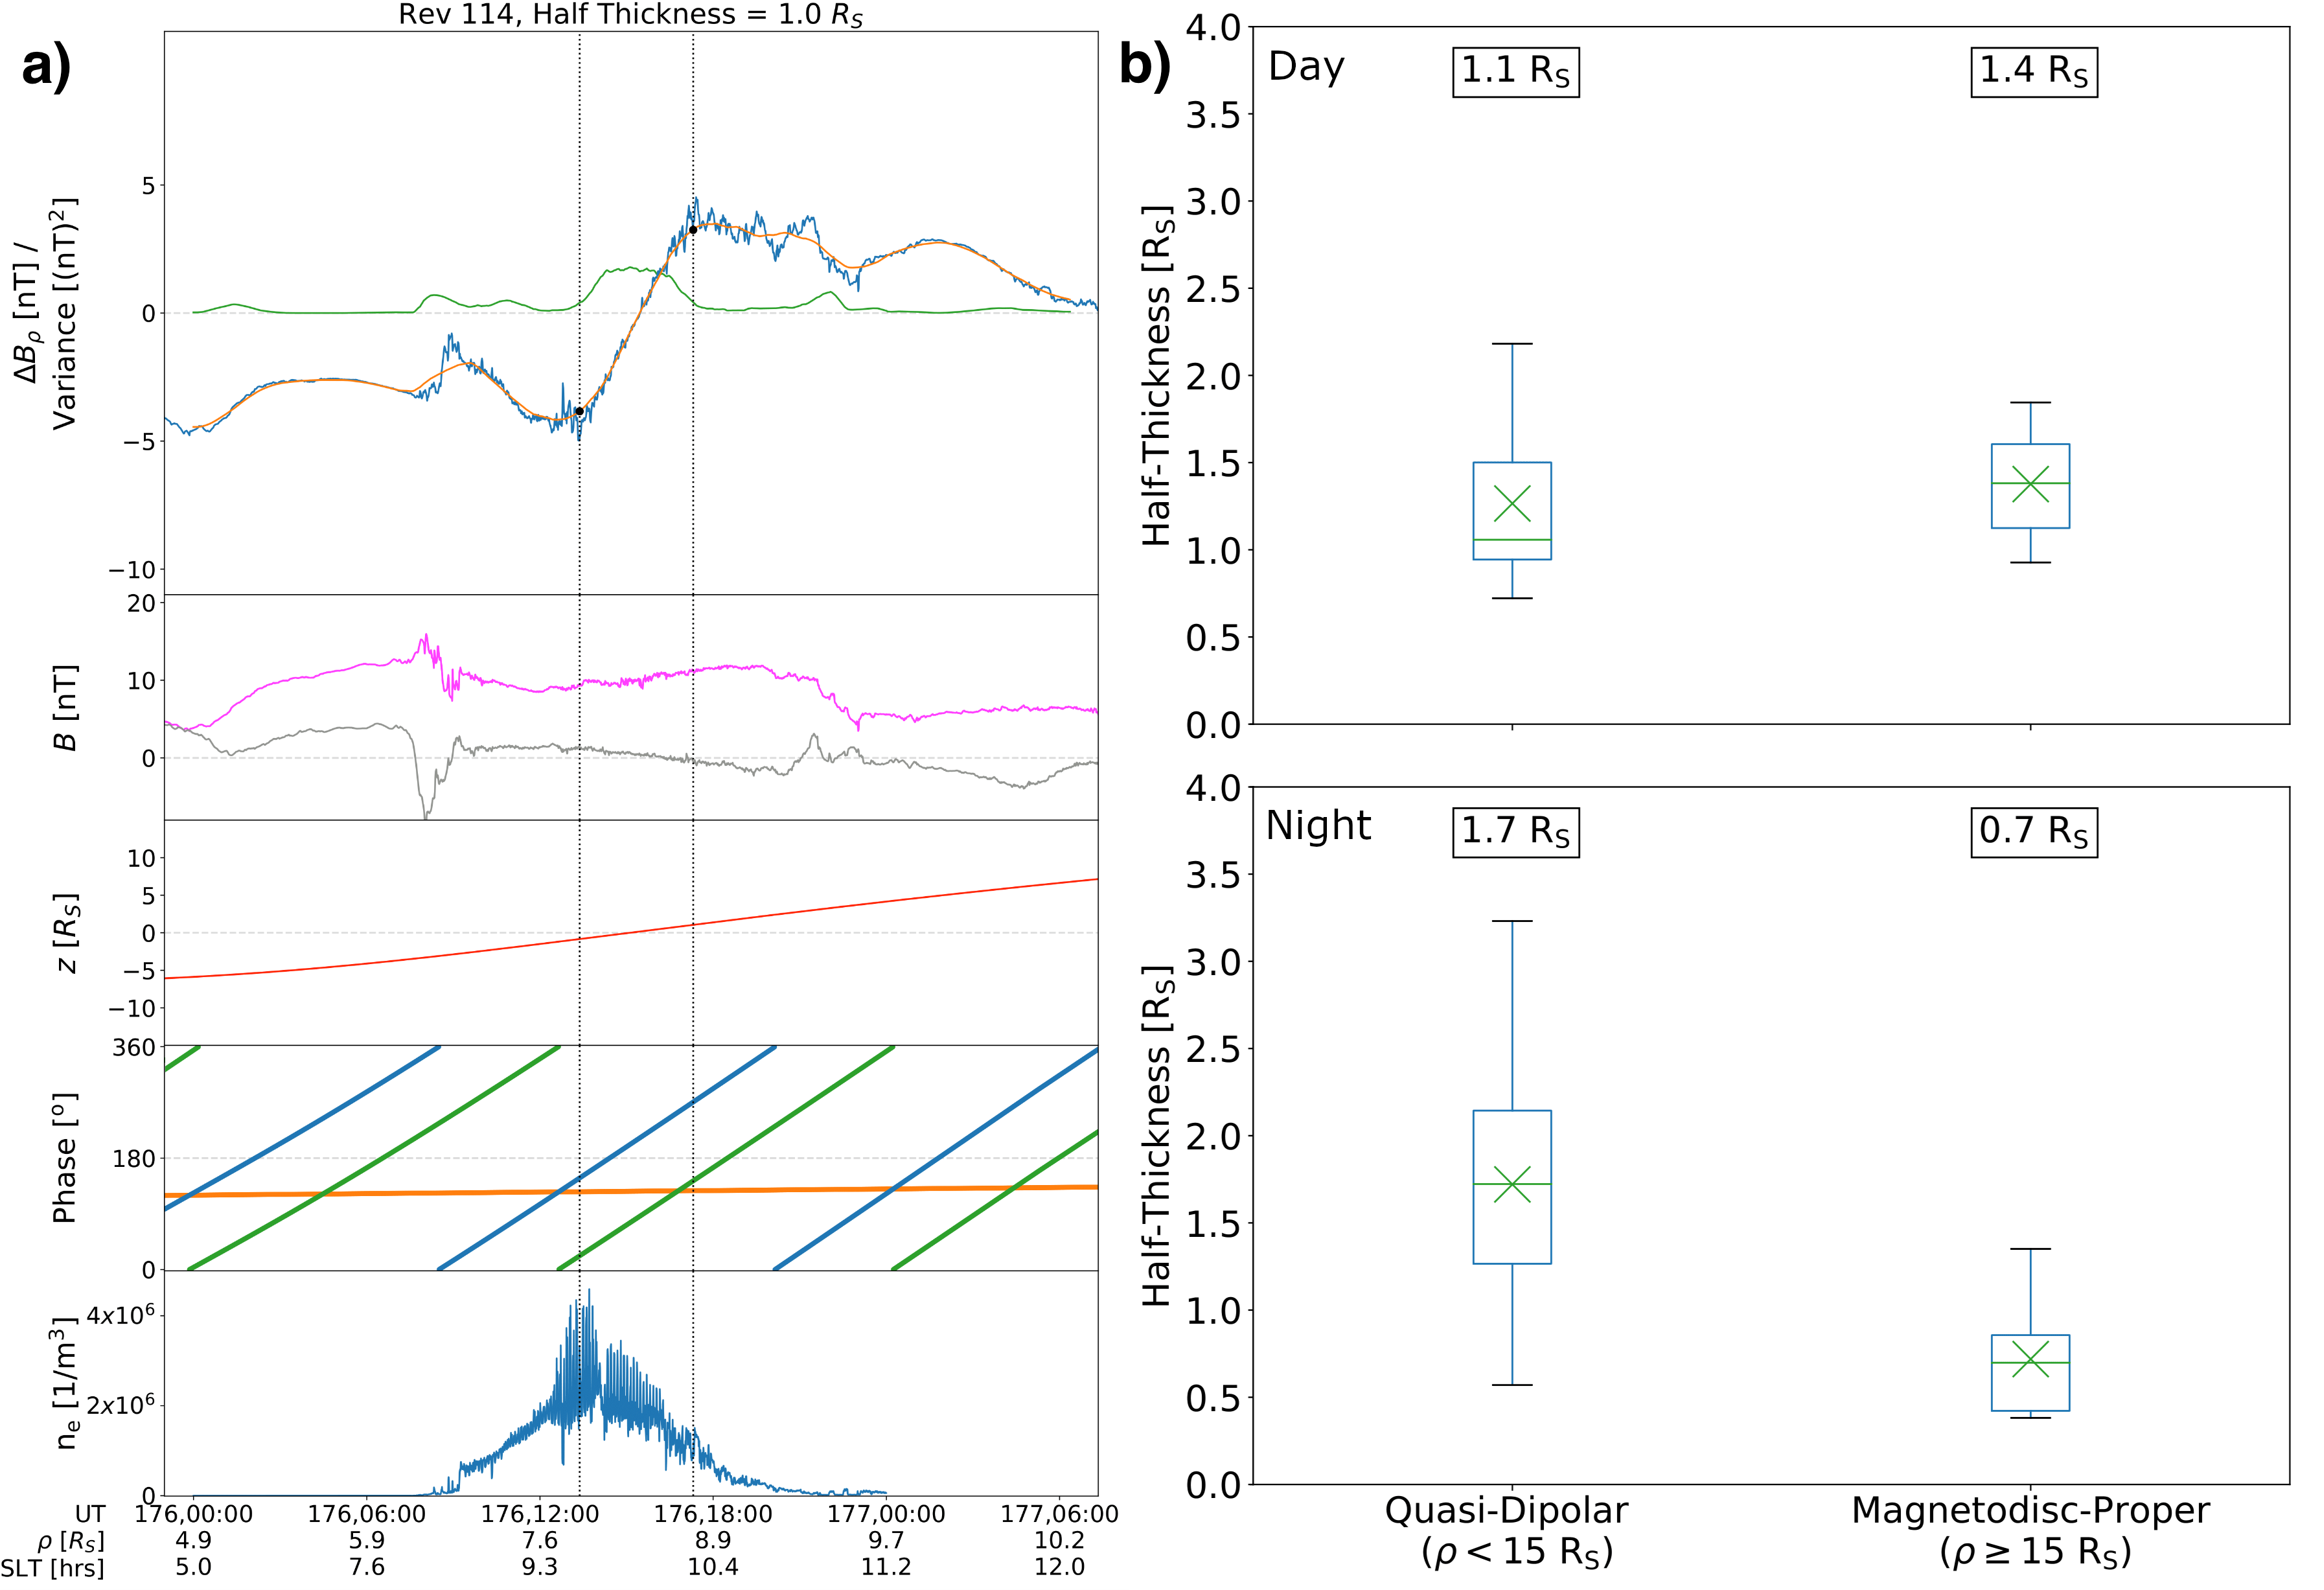 Plots showing (a) magnetic field signatures of a current sheet crossing for a example pass and (b) statistical distribution of the current sheet thickness comparing dayside and nightside crossings and inner and magnetodisc crossings.